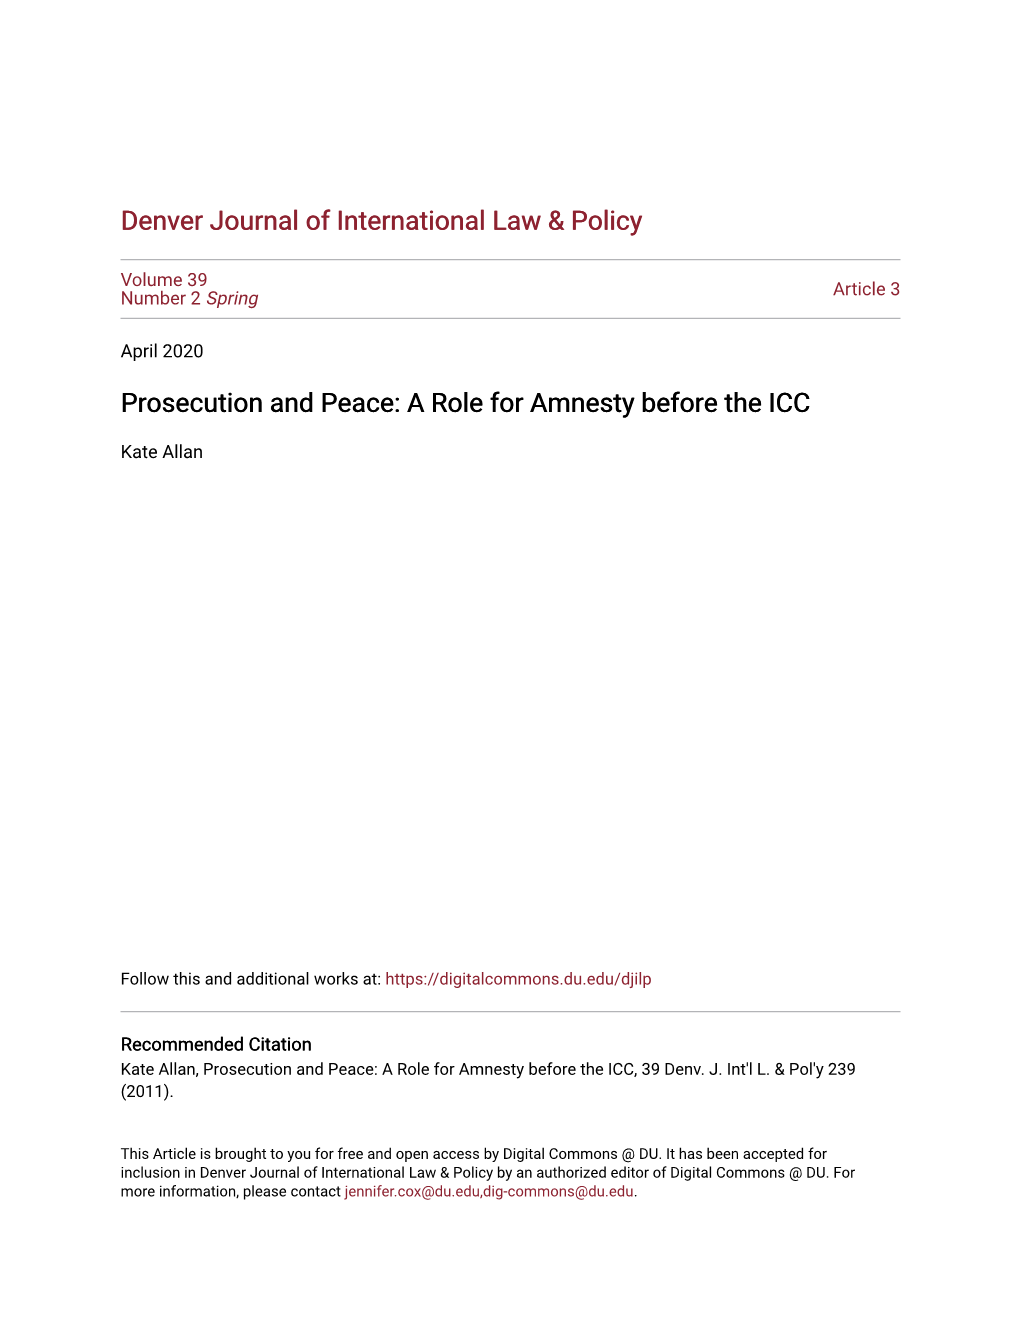 Prosecution and Peace: a Role for Amnesty Before the ICC